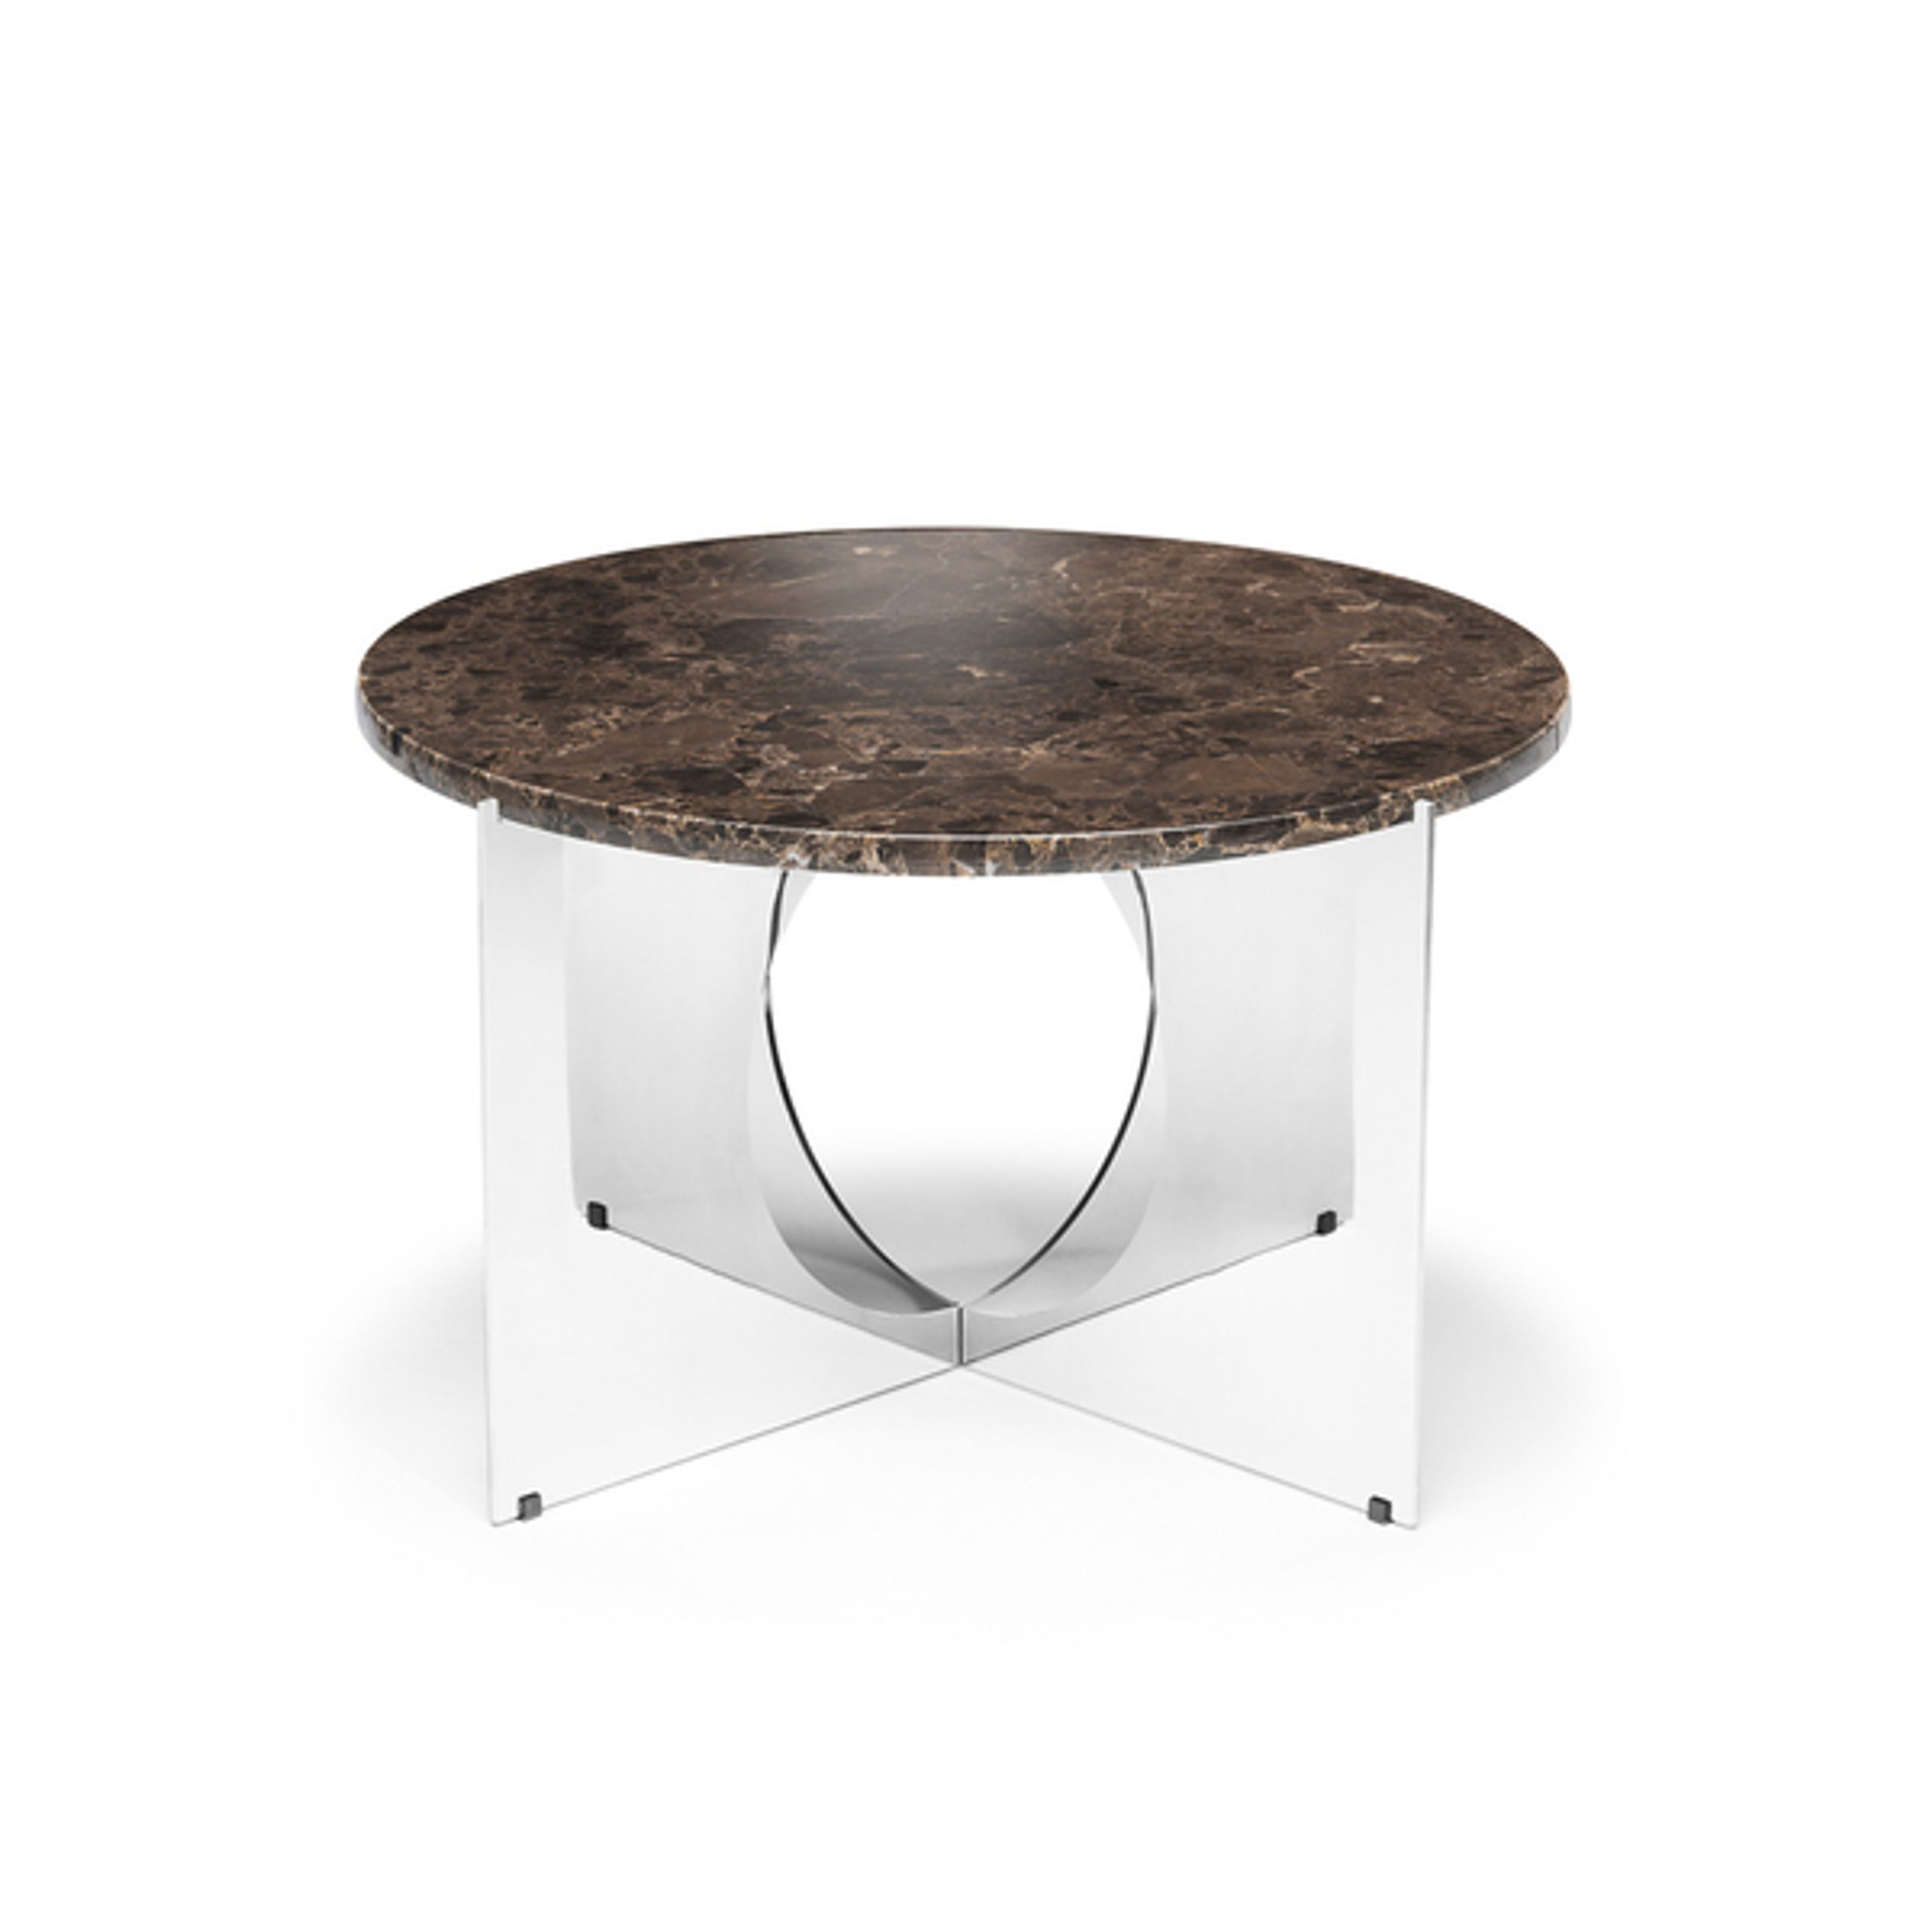 Design By Us - Mesa de centro - This Is Art Table - Marble - Brown - Chrome